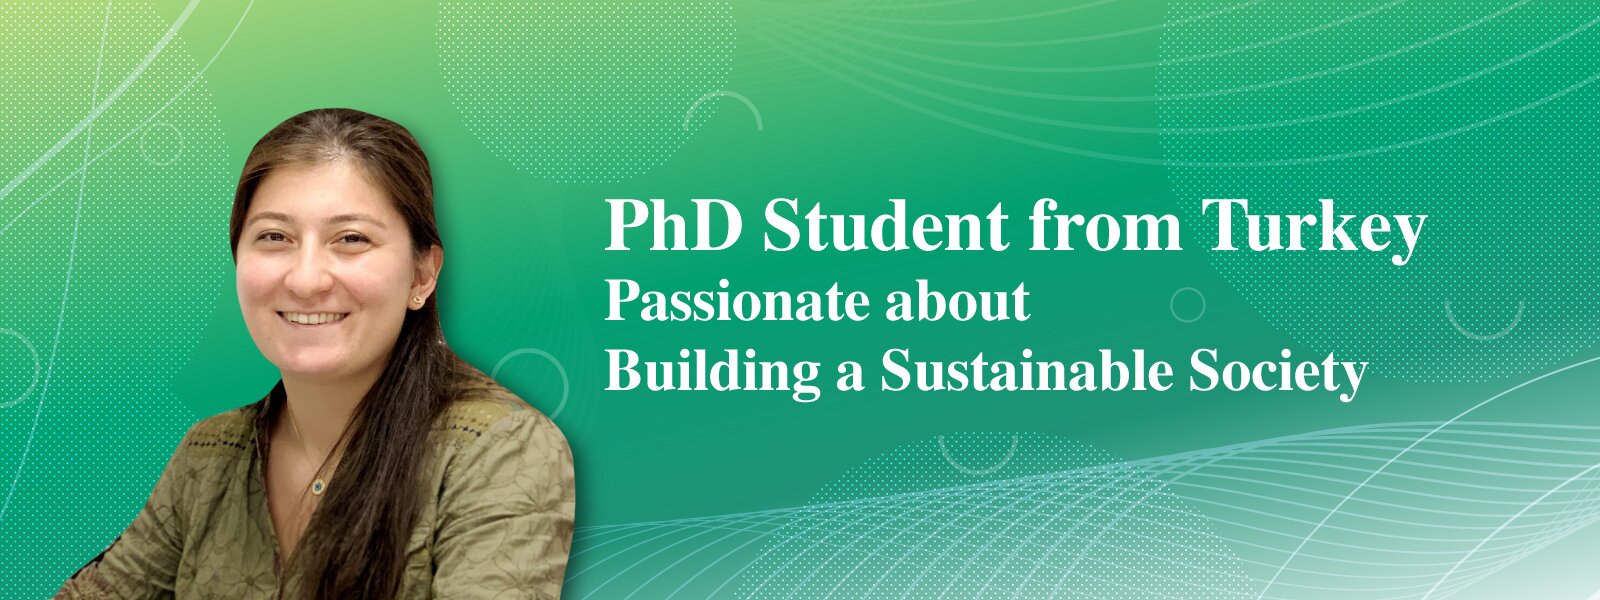 PhD Student from Turkey Passionate about Building a Sustainable Society